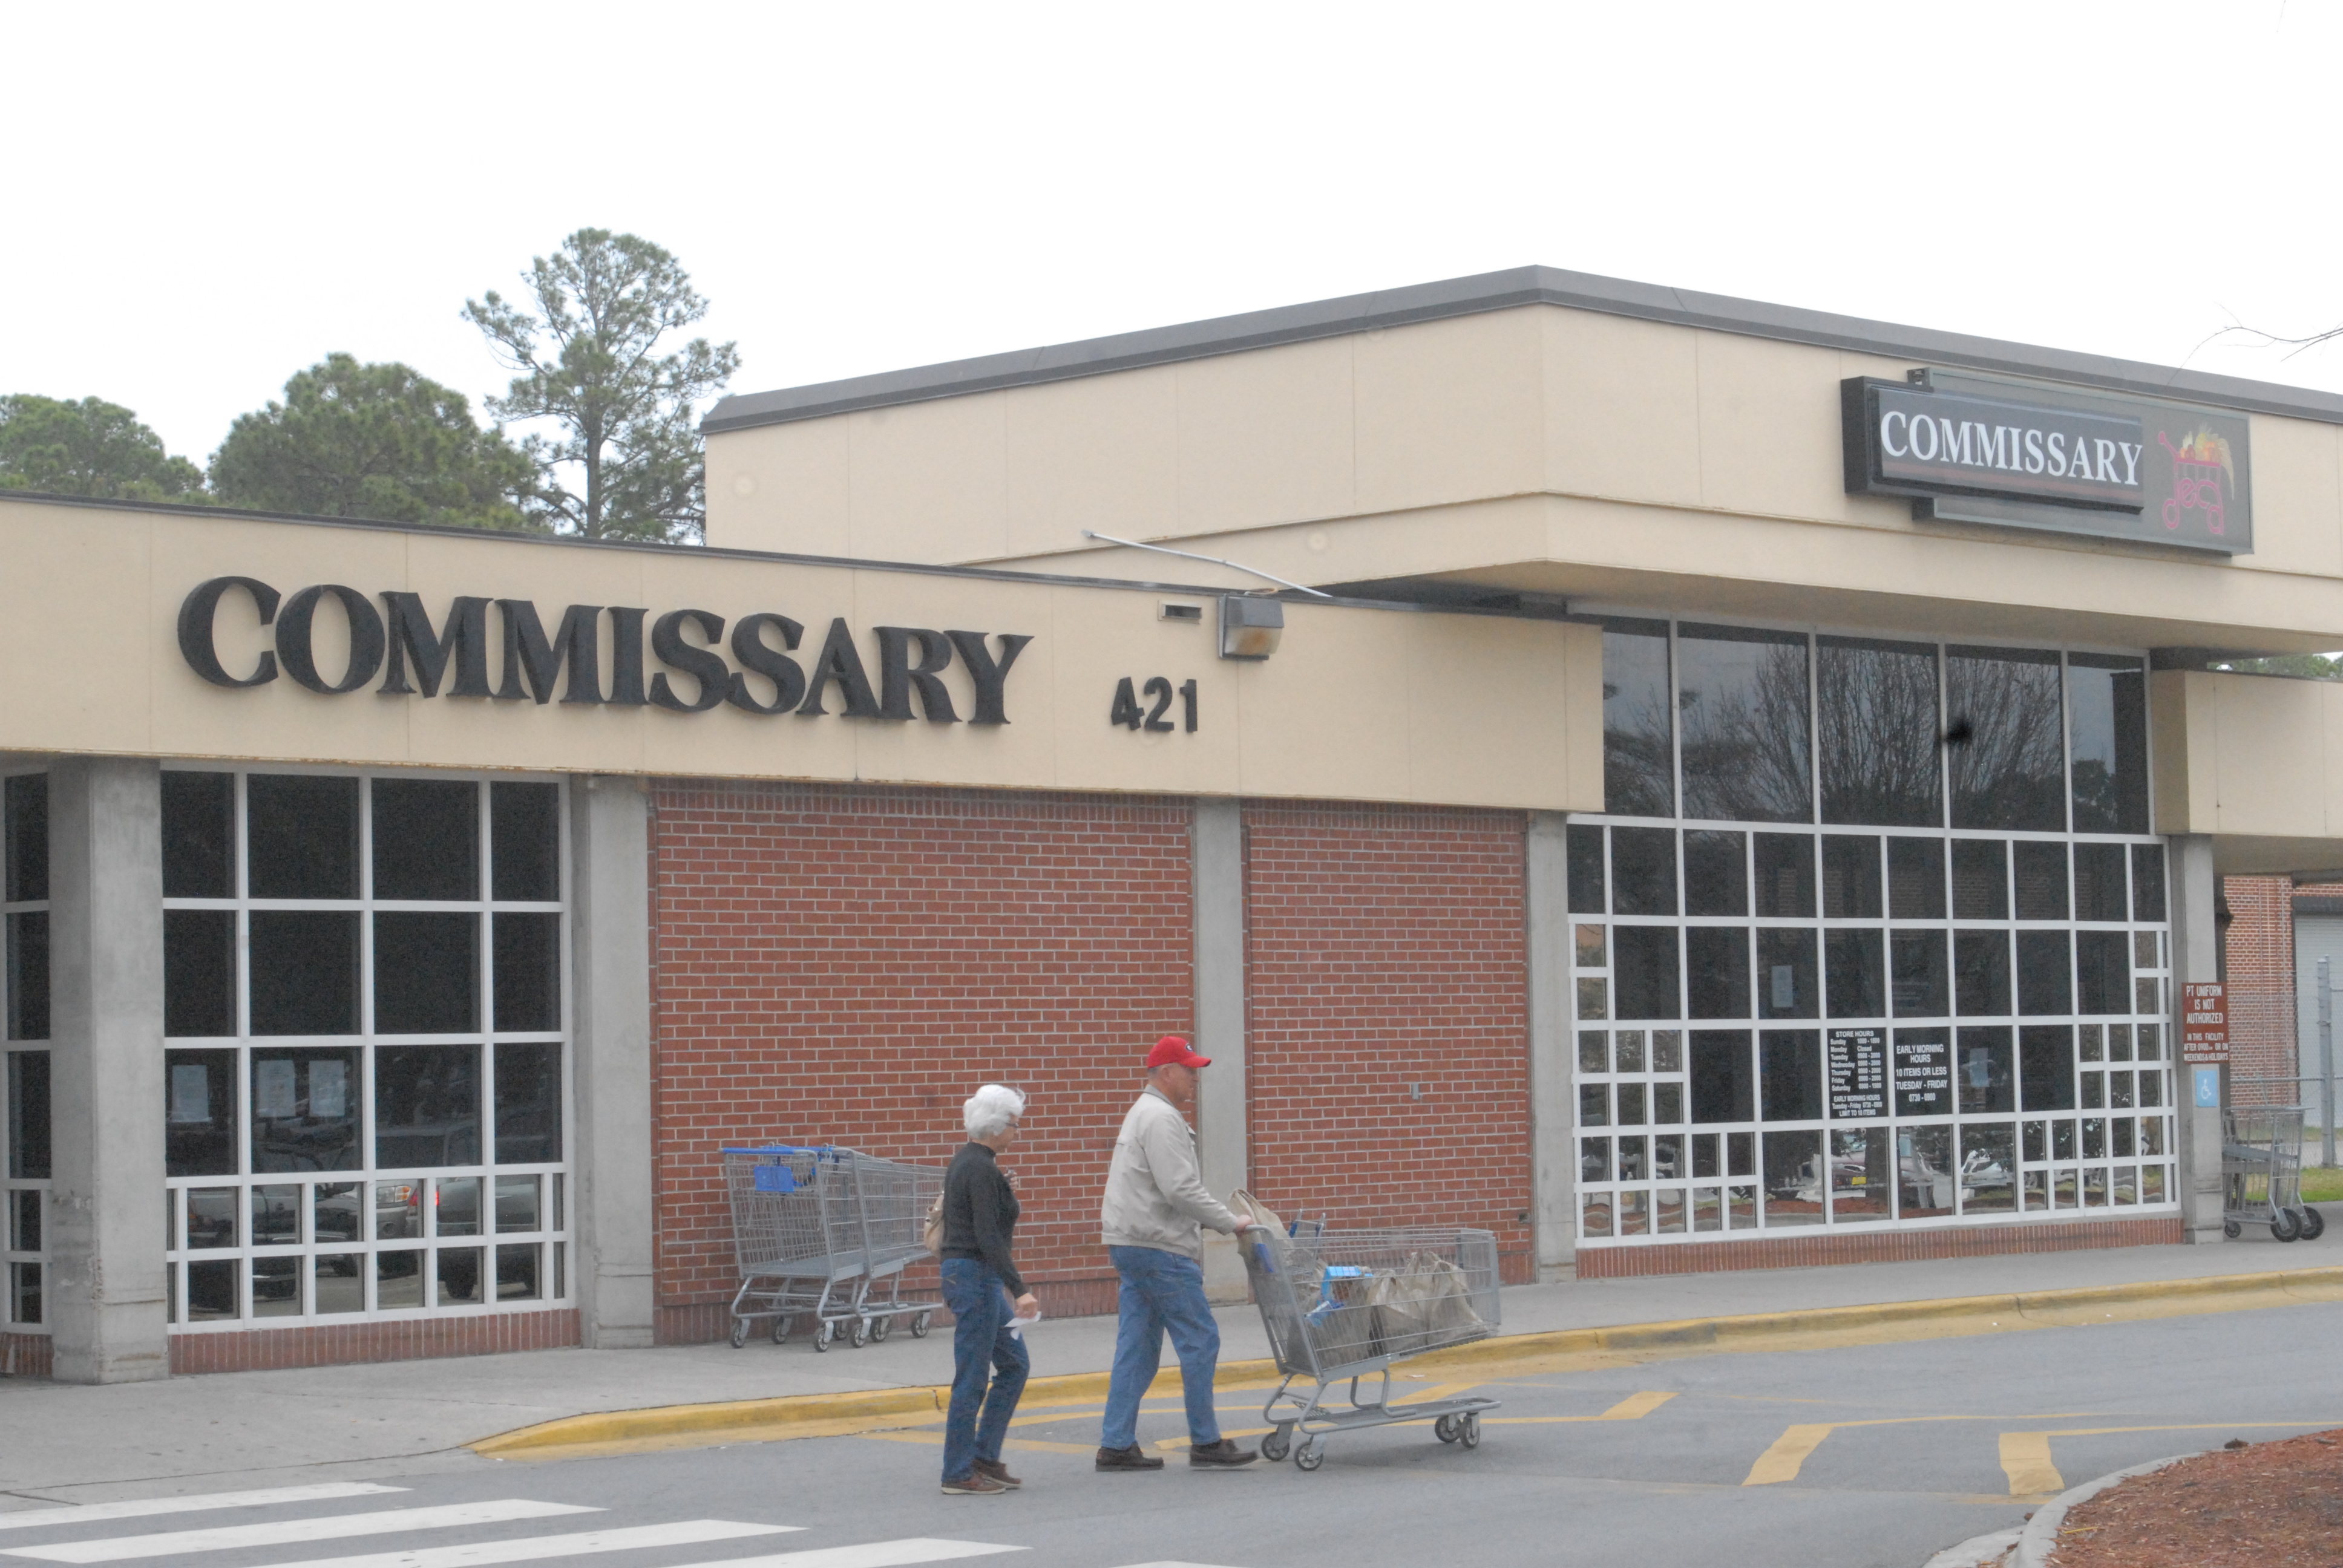 Monitoring Commissary Patrons' Savings In An Era Of Reforms.